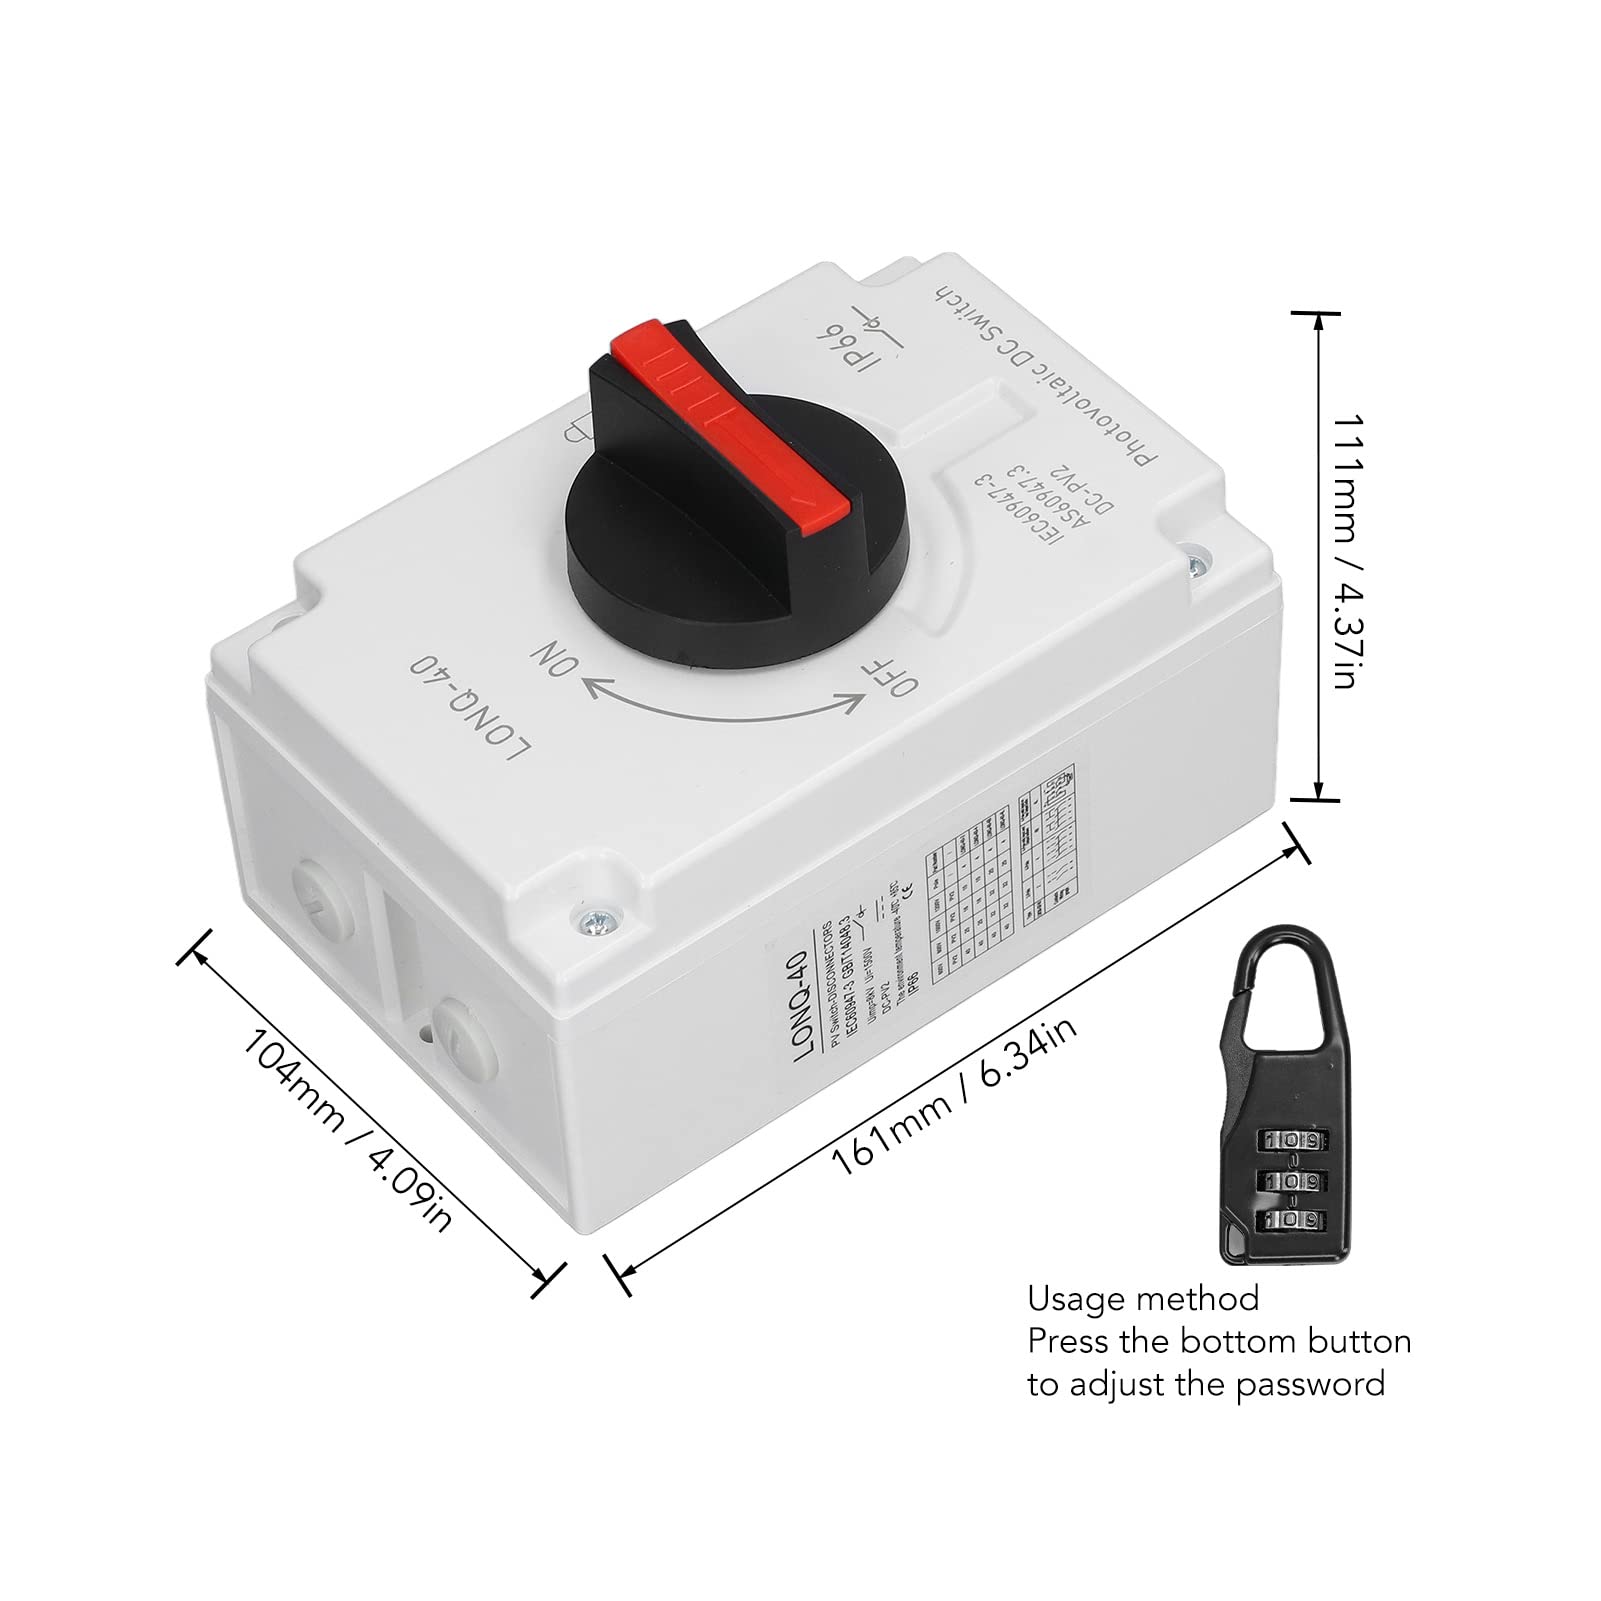 PV Solar Disconnect Switch, LONQ 40 DC Isolator Solar Switch IP66 Waterproof DC1000V 32A 4P Disconnect Switch for Solar Photovoltaic Systems